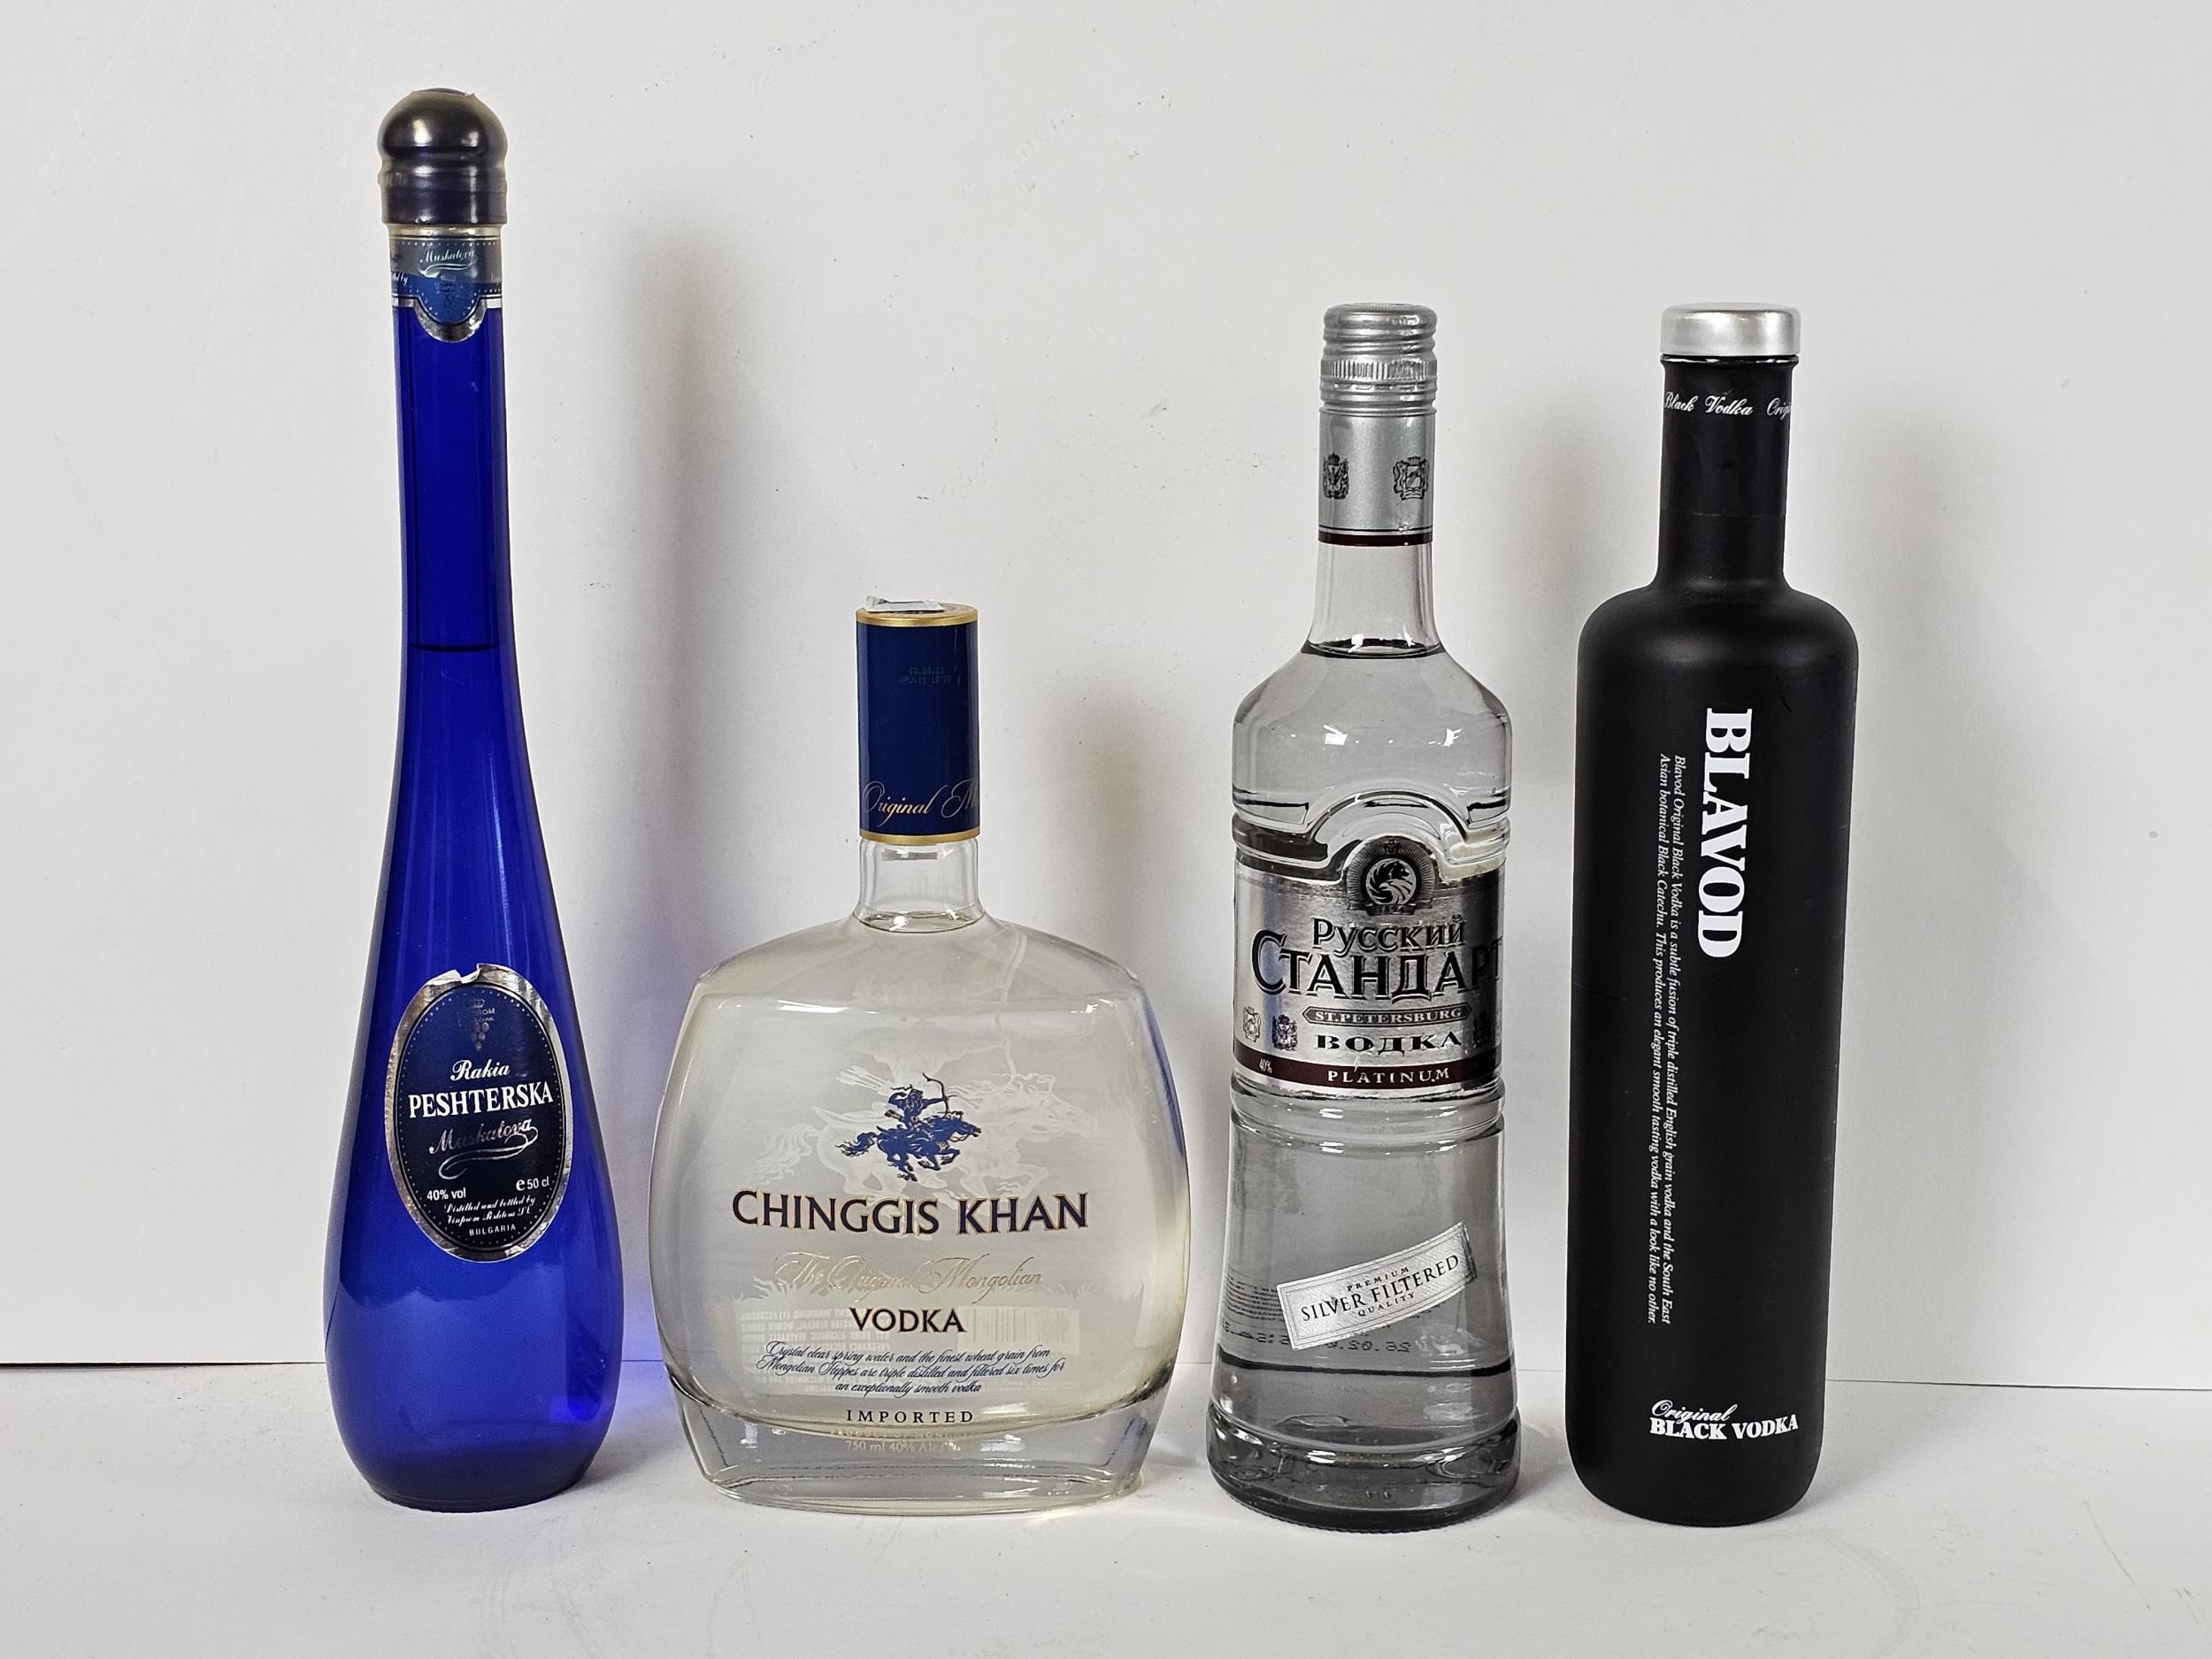 A bottle of Blavod Black Vodka, UK, together with a bottle of Chinggis Khan Vodka, Mongolia, and a